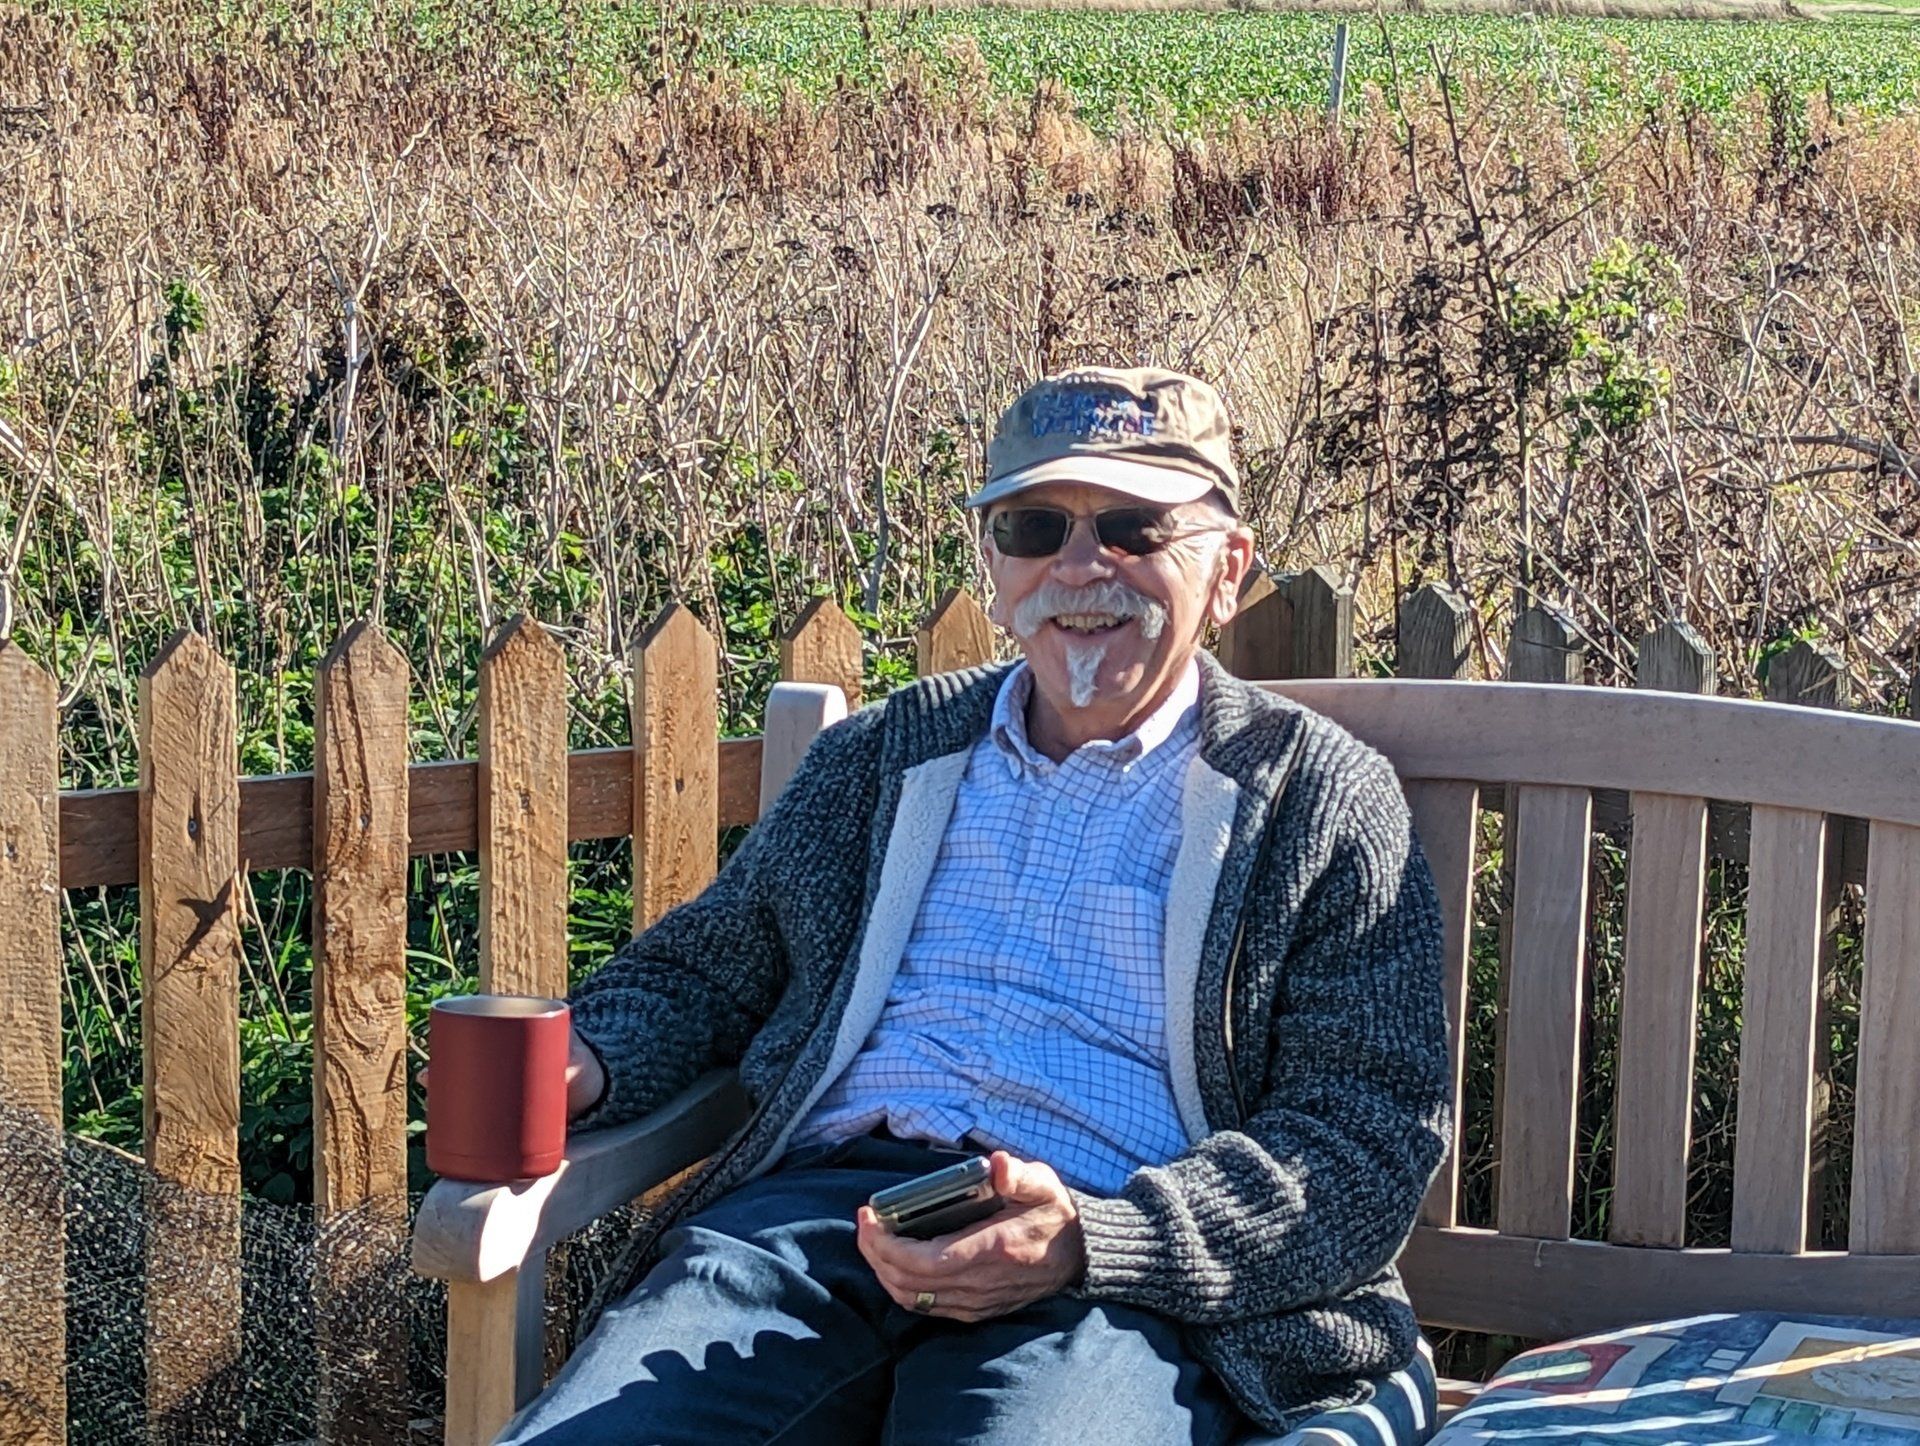 Steve sitting on a wooden bench enjoying the sunshine on holiday. He has a mug of tea in his hand